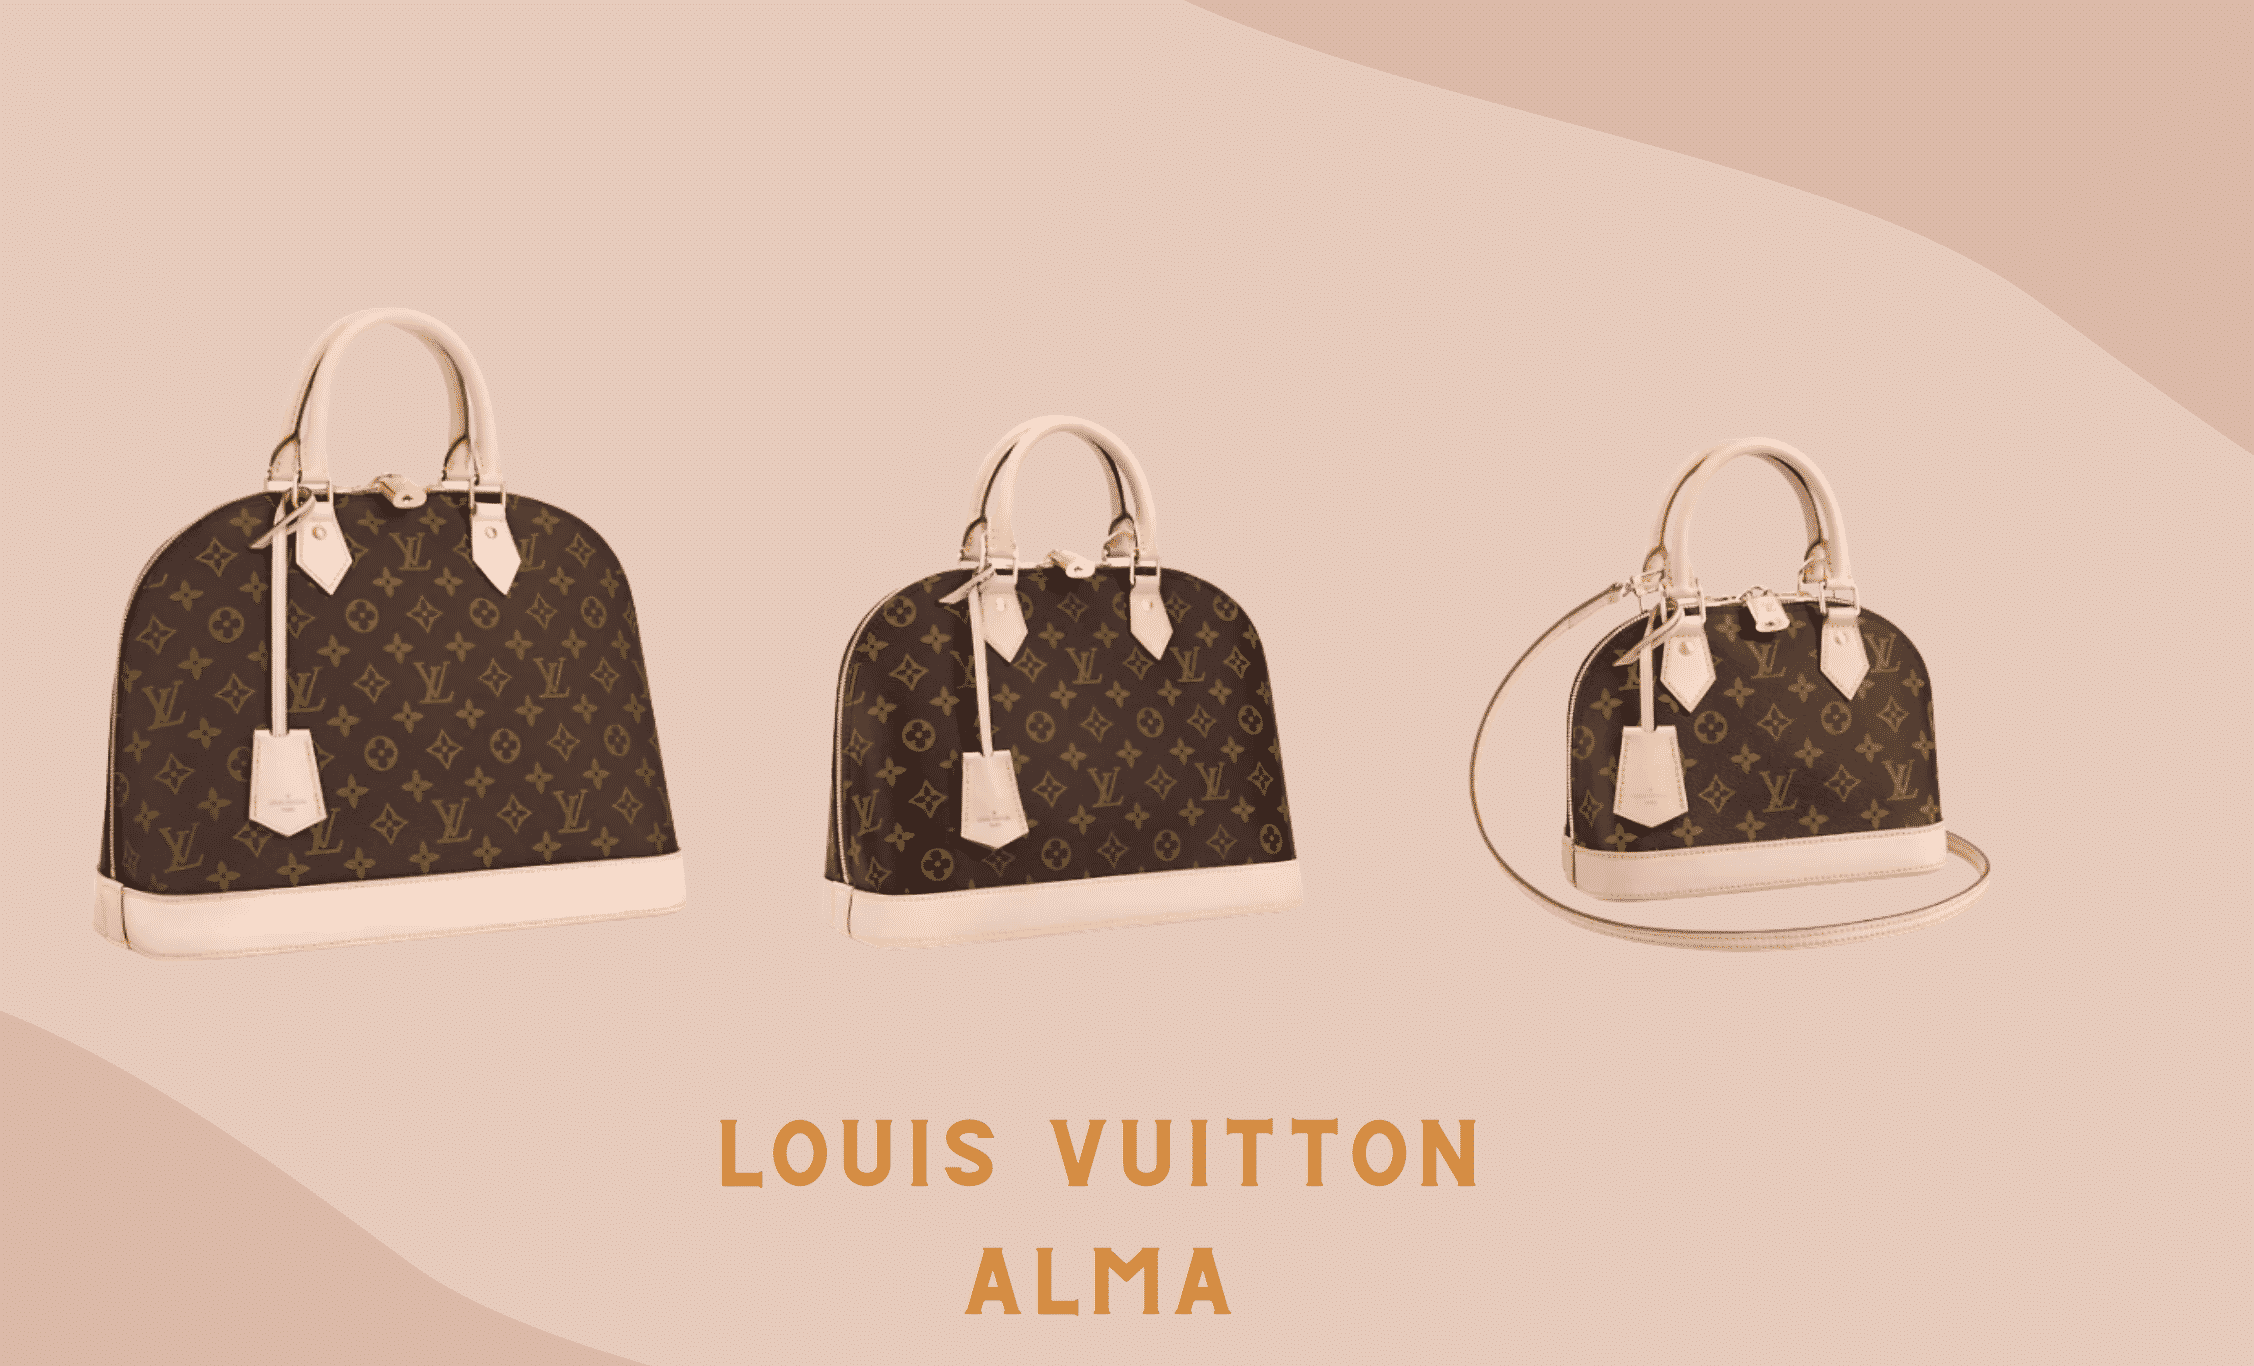 The Best Louis Vuitton Bags To Invest in 2023 - Luxe Front